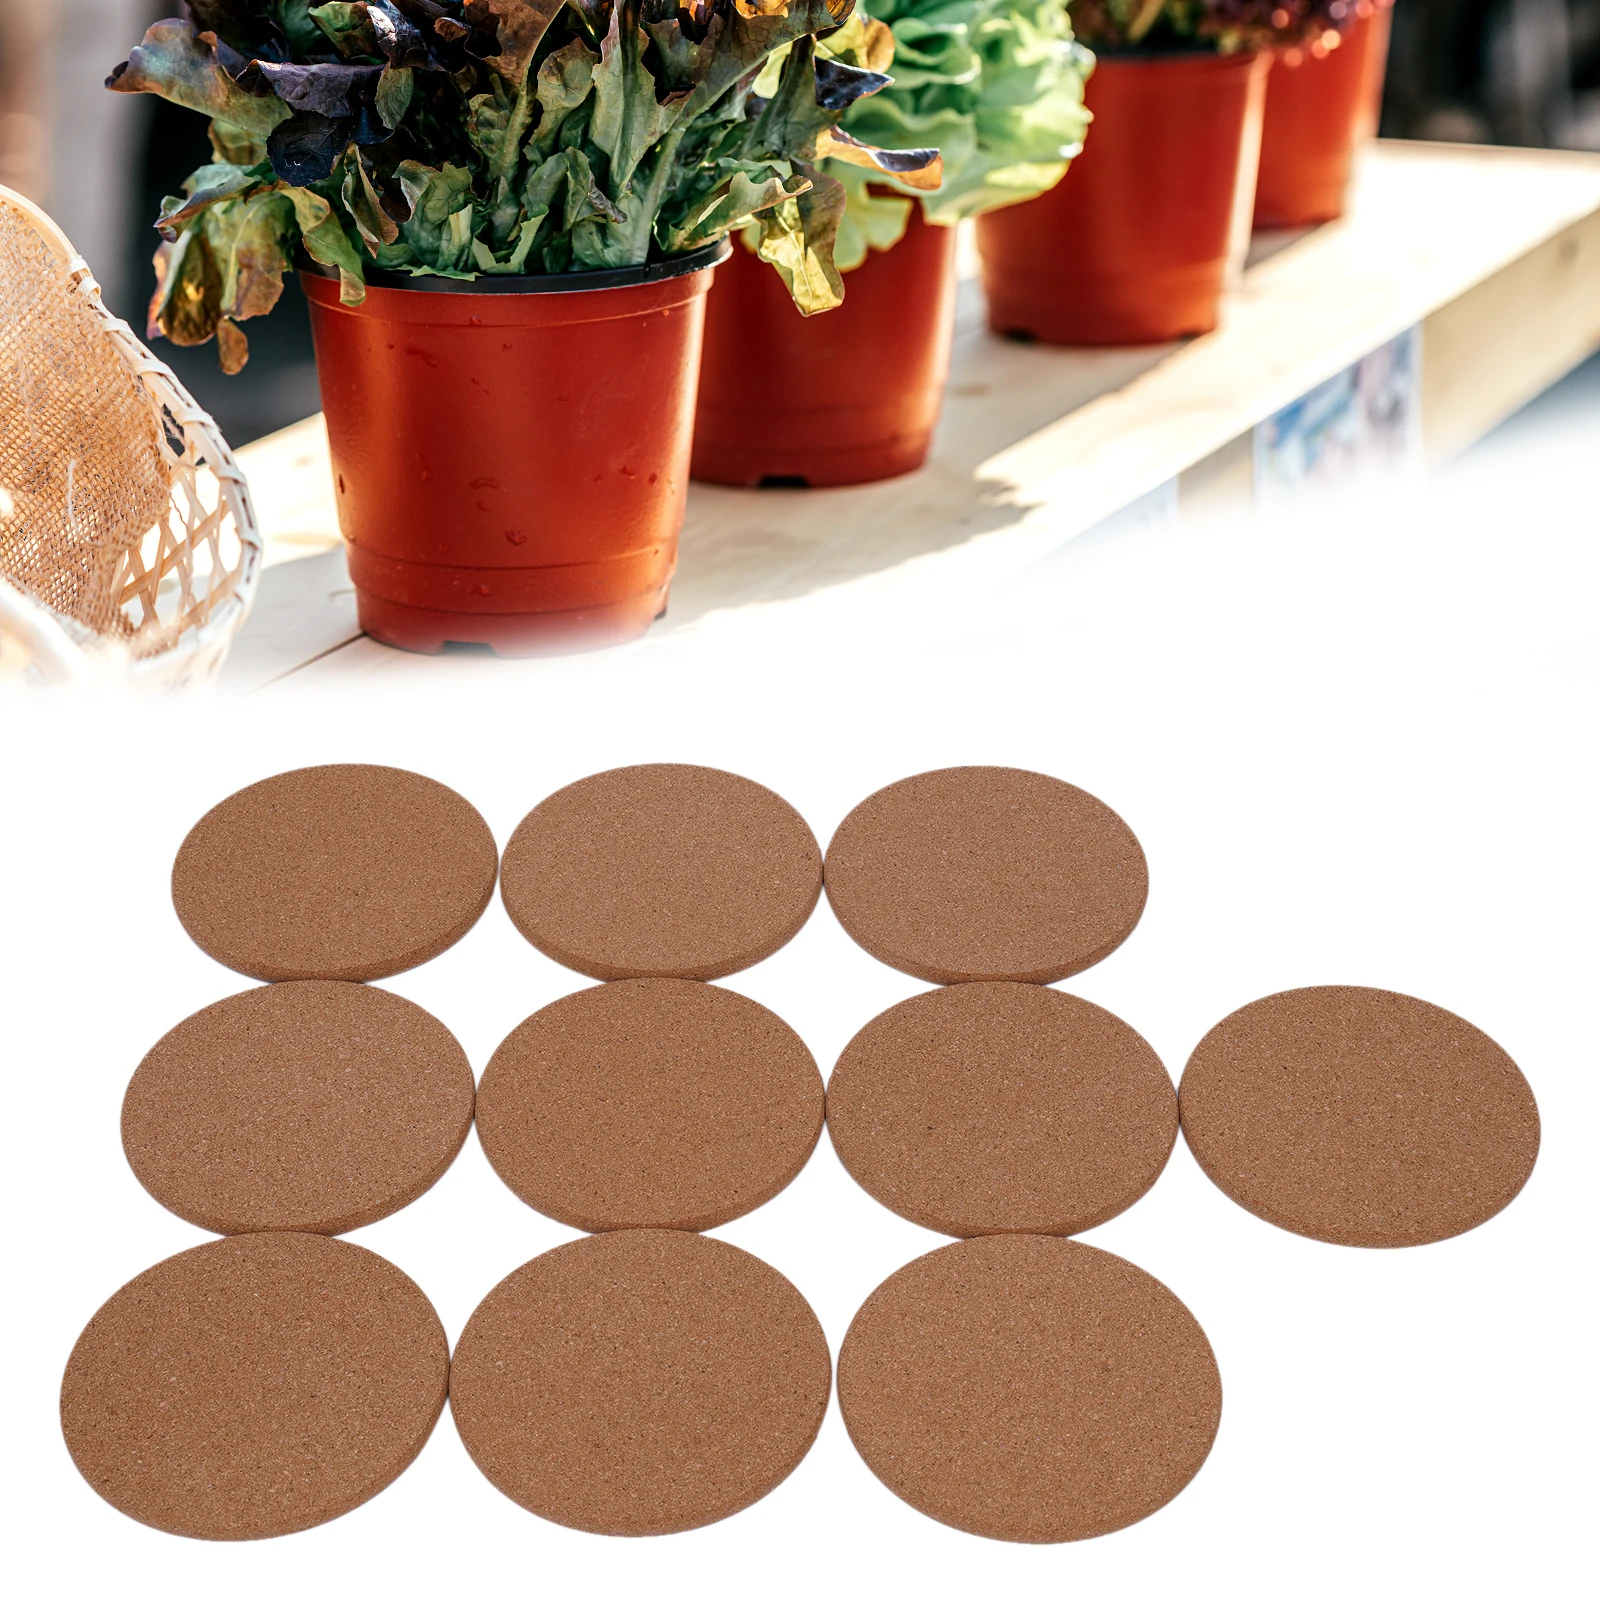 

10pcs Cork Plant Mat Round Cork Plant Coasters DIY Cork Pad Plant Plate Pad for Gardening, Indoor and Outdoor Pots, DIY Craft